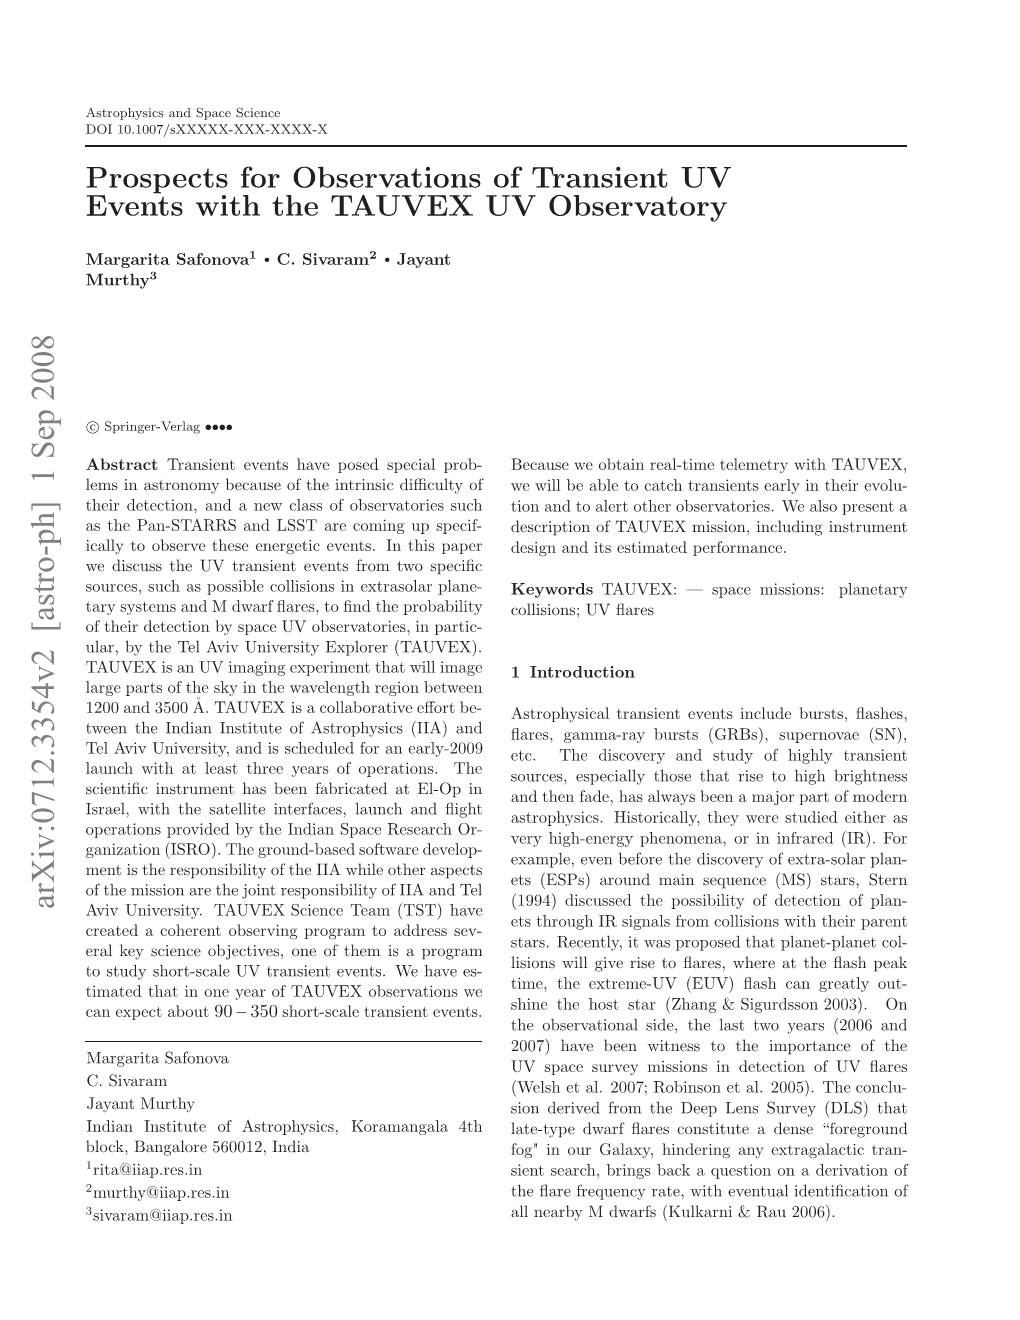 Prospects for Observations of Transient UV Events with the TAUVEX UV Observatory 3